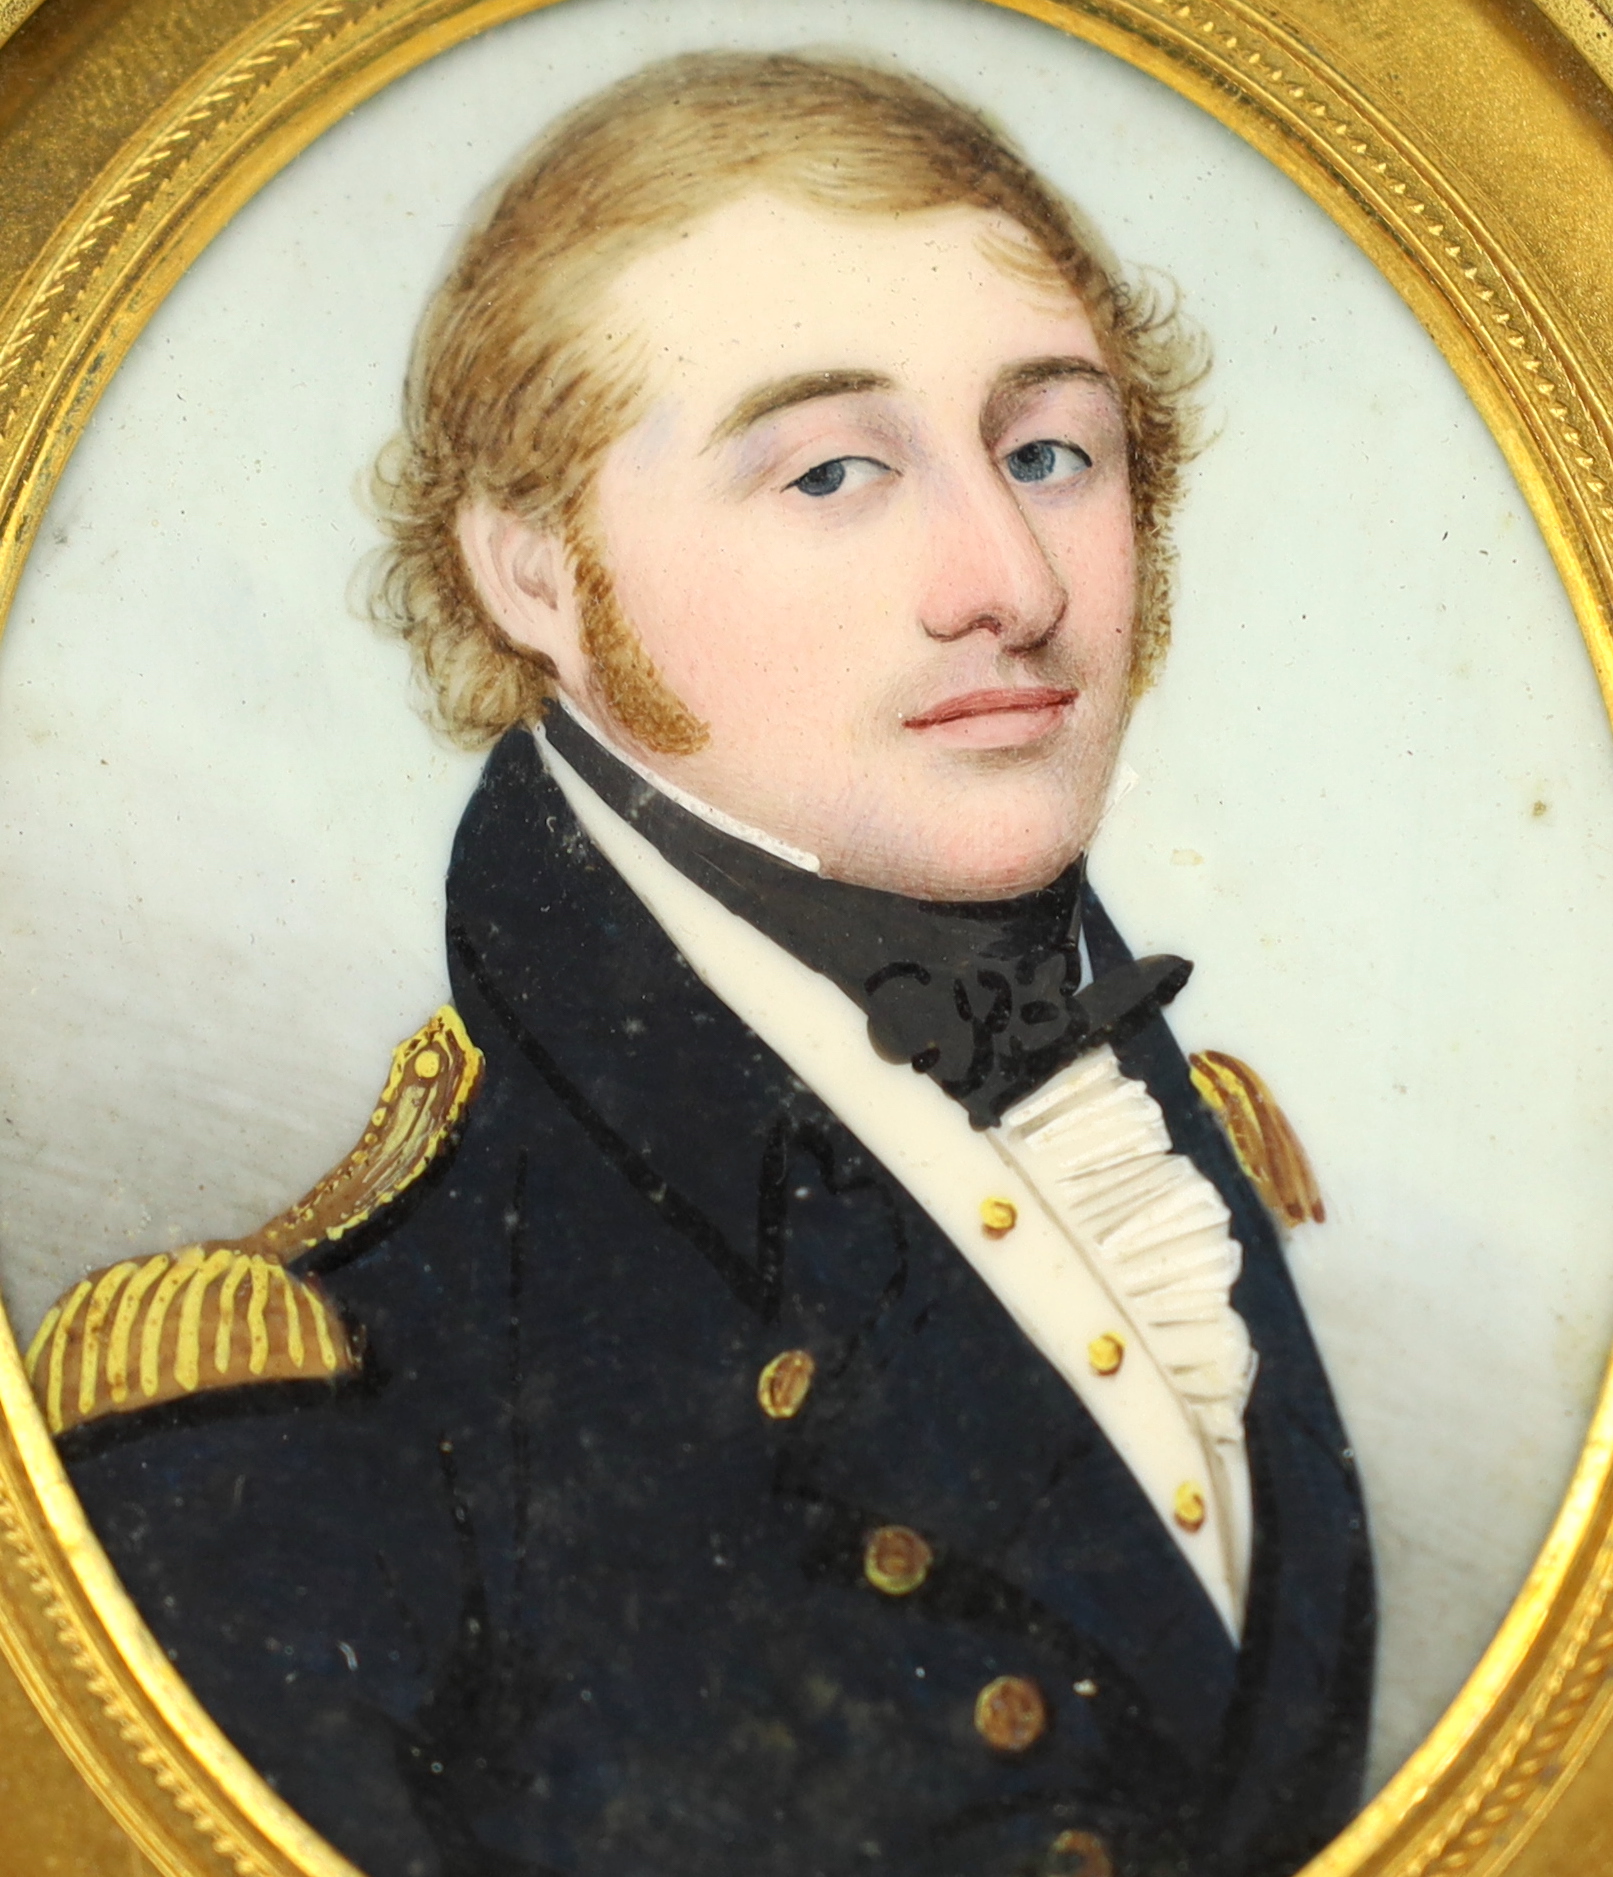 Frederick Buck (Irish, 1771-1840), Portrait miniature of a naval officer, watercolour on ivory, 6.3 x 5cm. CITES Submission reference 8A2S9SYD